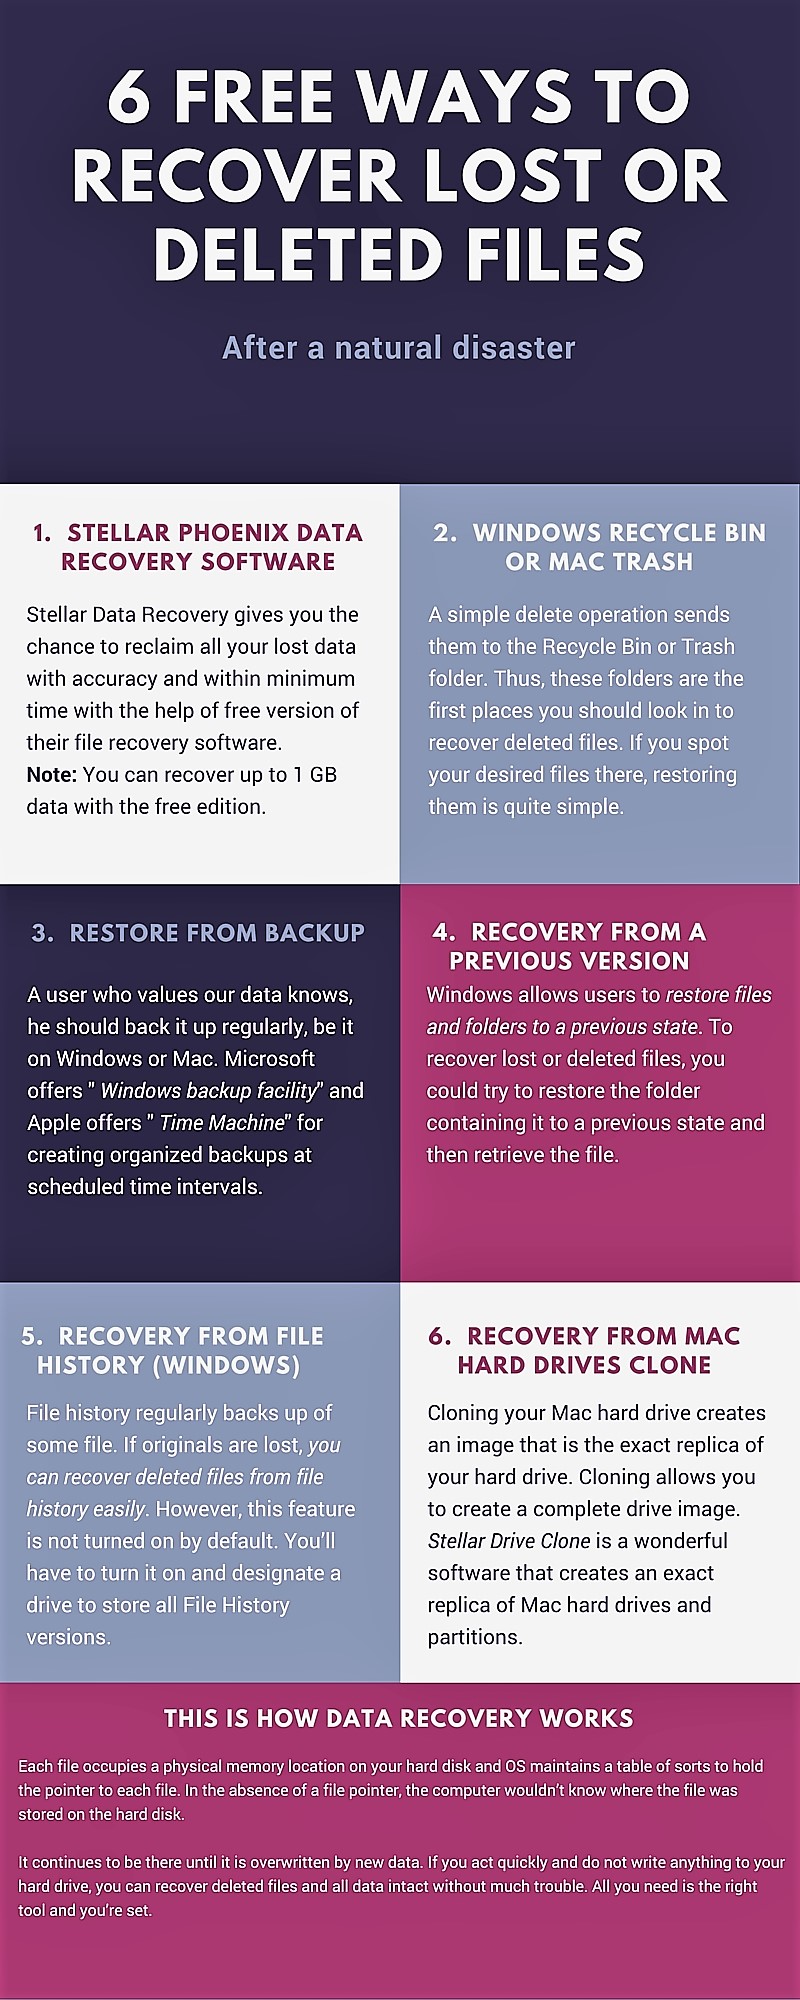 Recover files from trash on mac